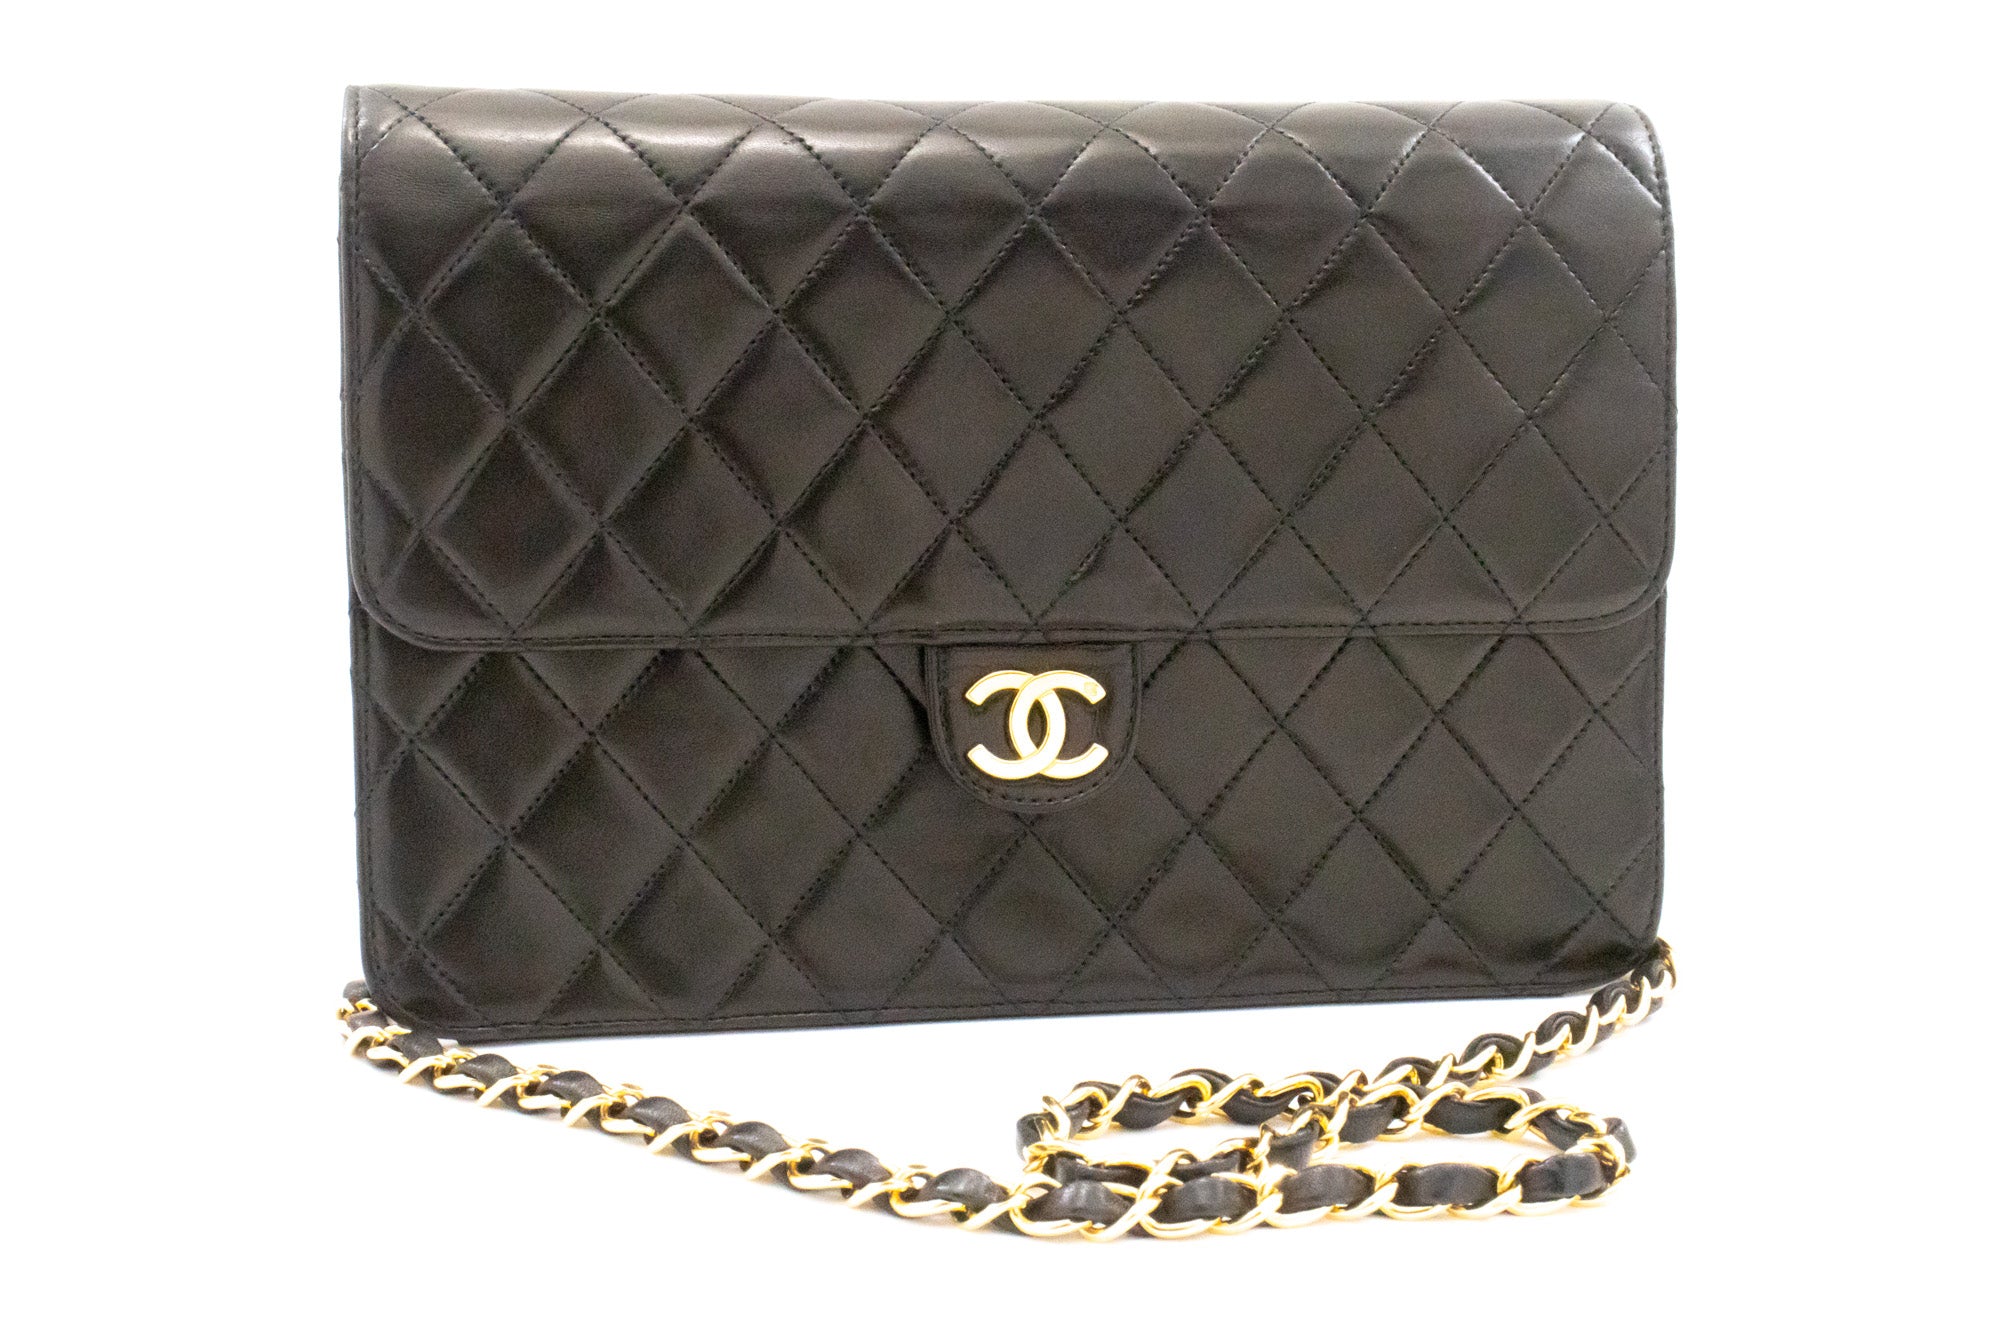 Chanel Chain Shoulder Bag Clutch Black Quilted Flap Lambskin Purse K36